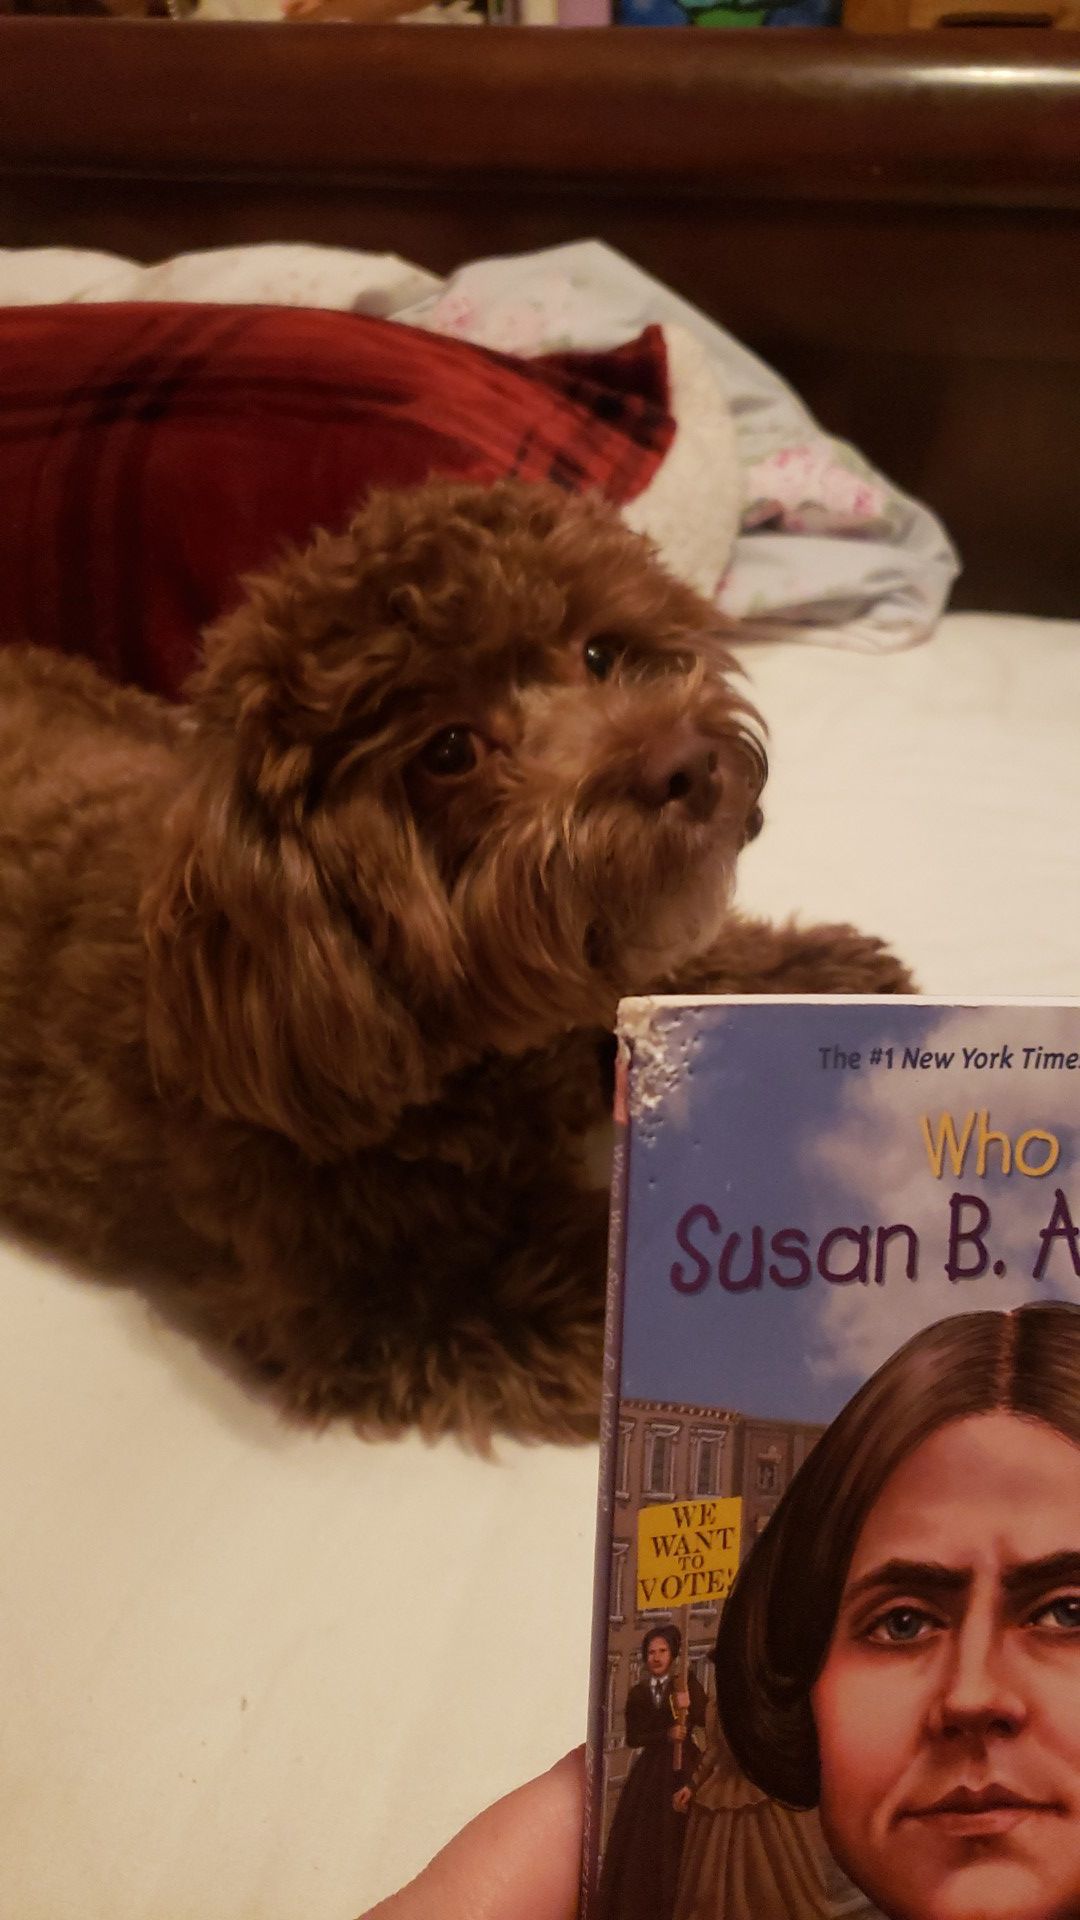 "Who was Susan B. Anthony?" Book